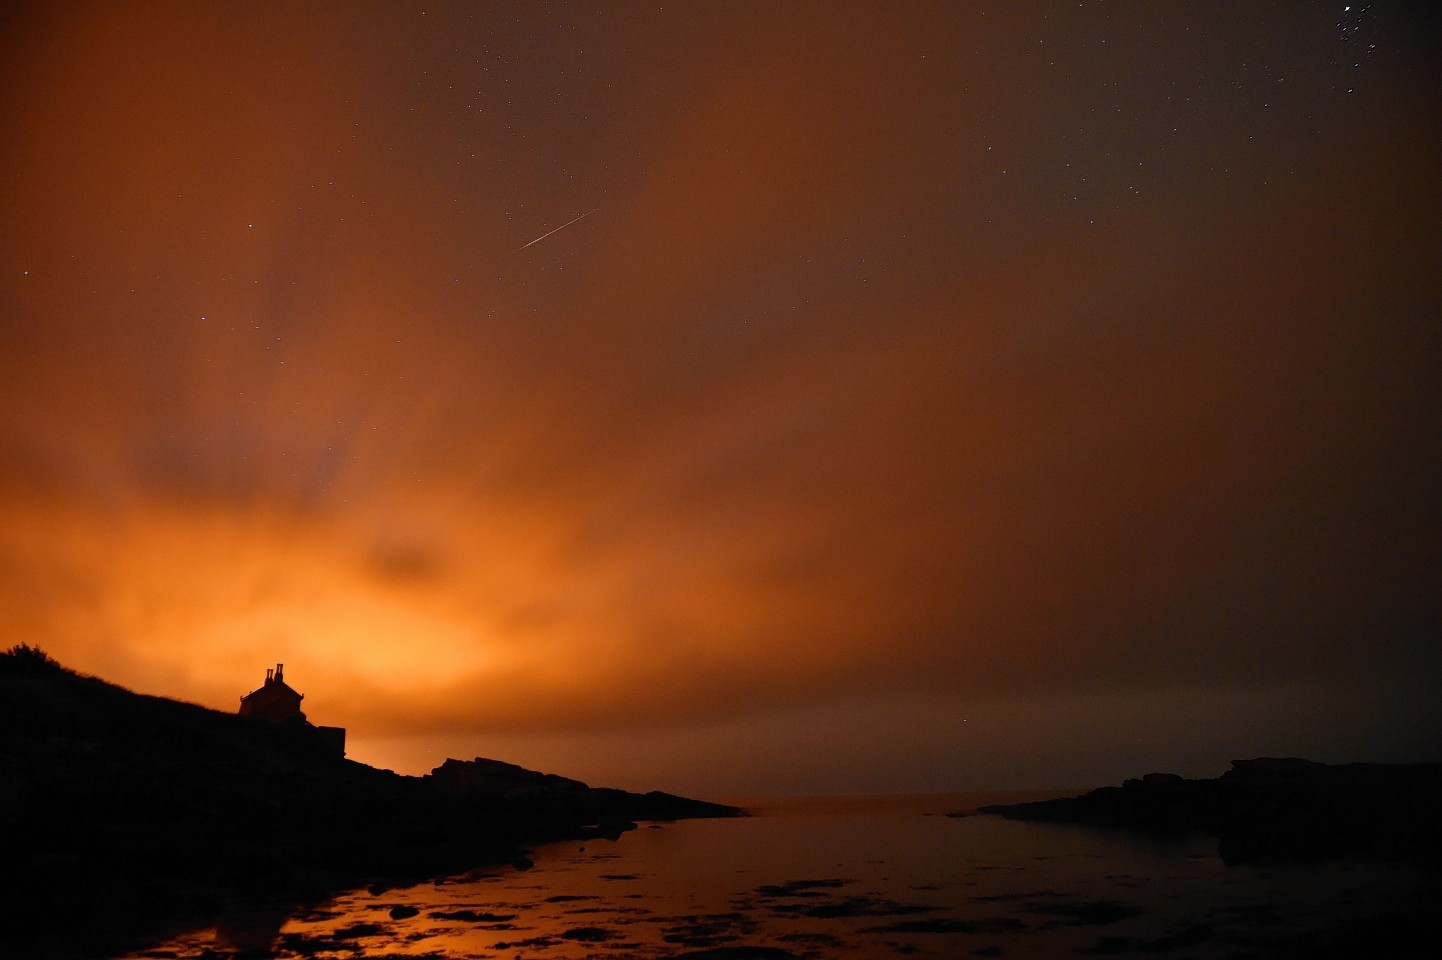 A shooting star seen through thin cloud in the skies over the Bathing House at Howick in Northumberland